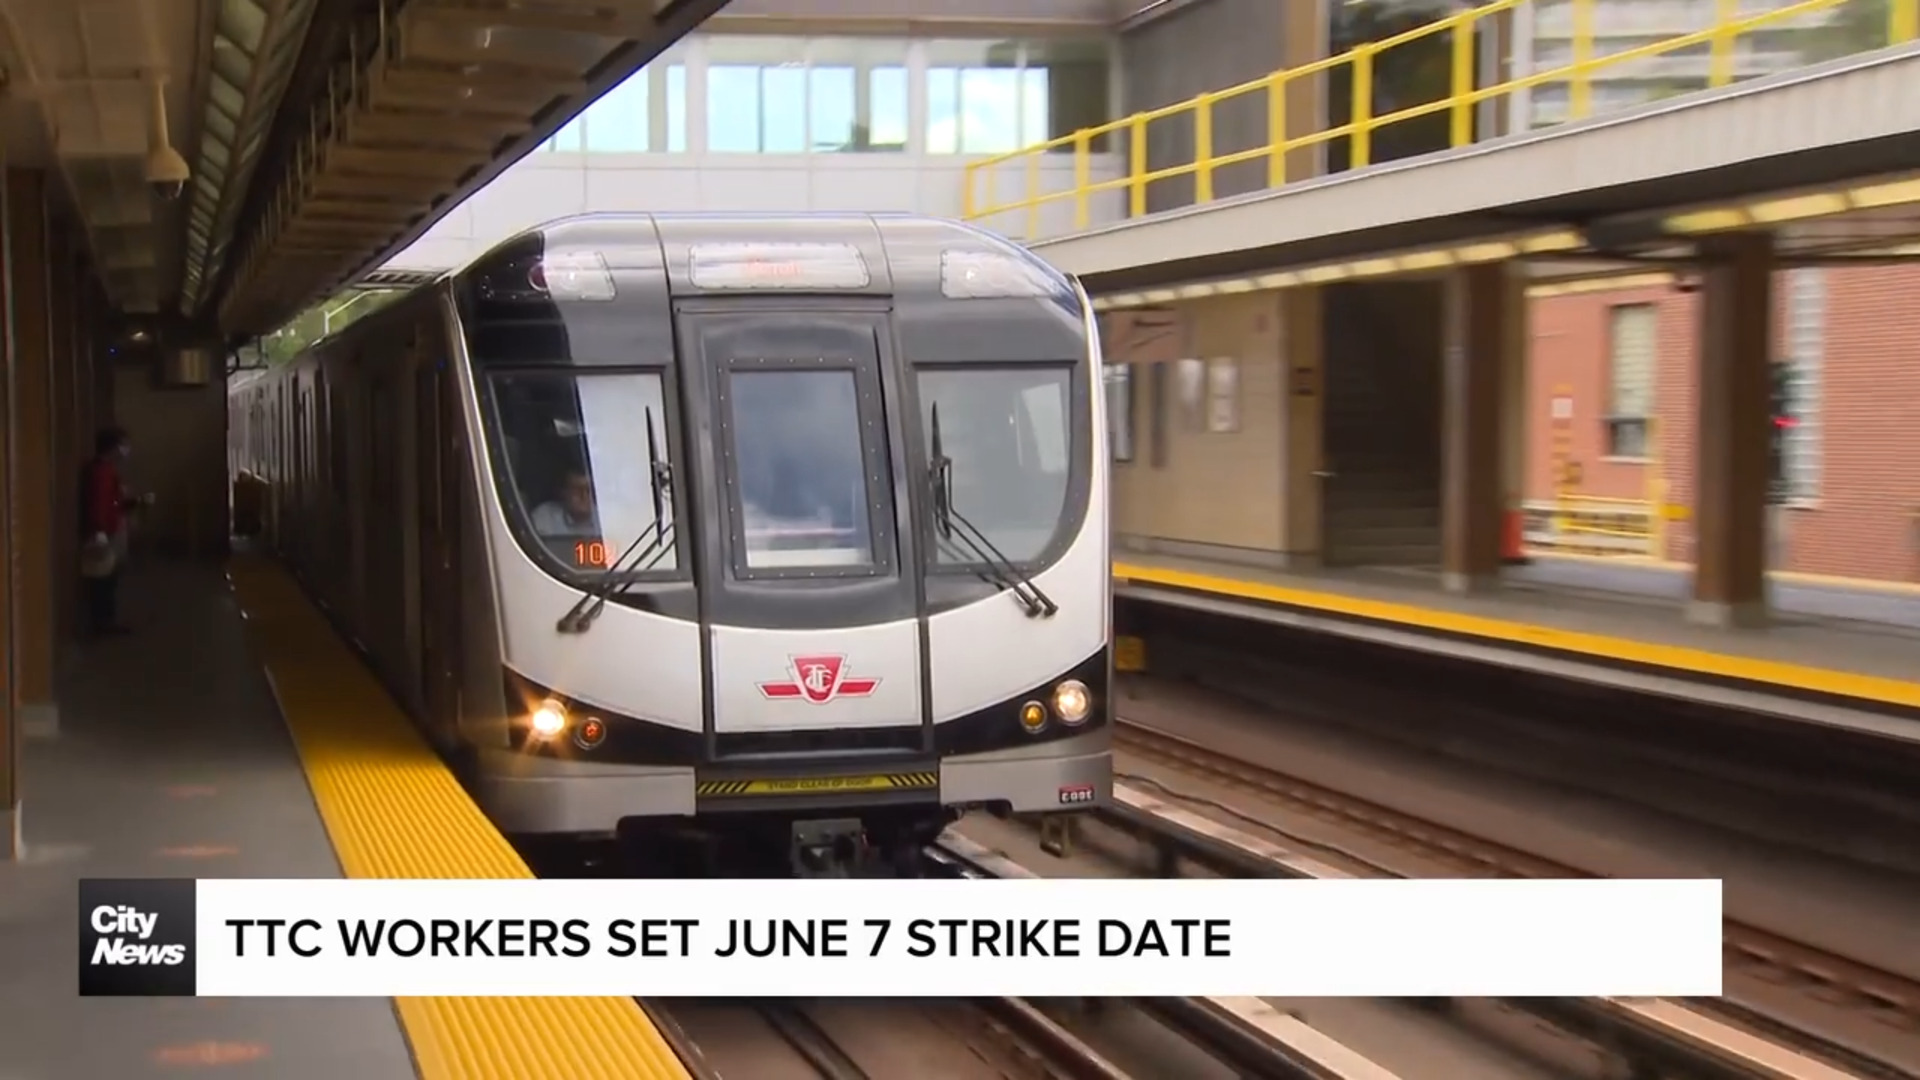 Union representing TTC workers sets strike date